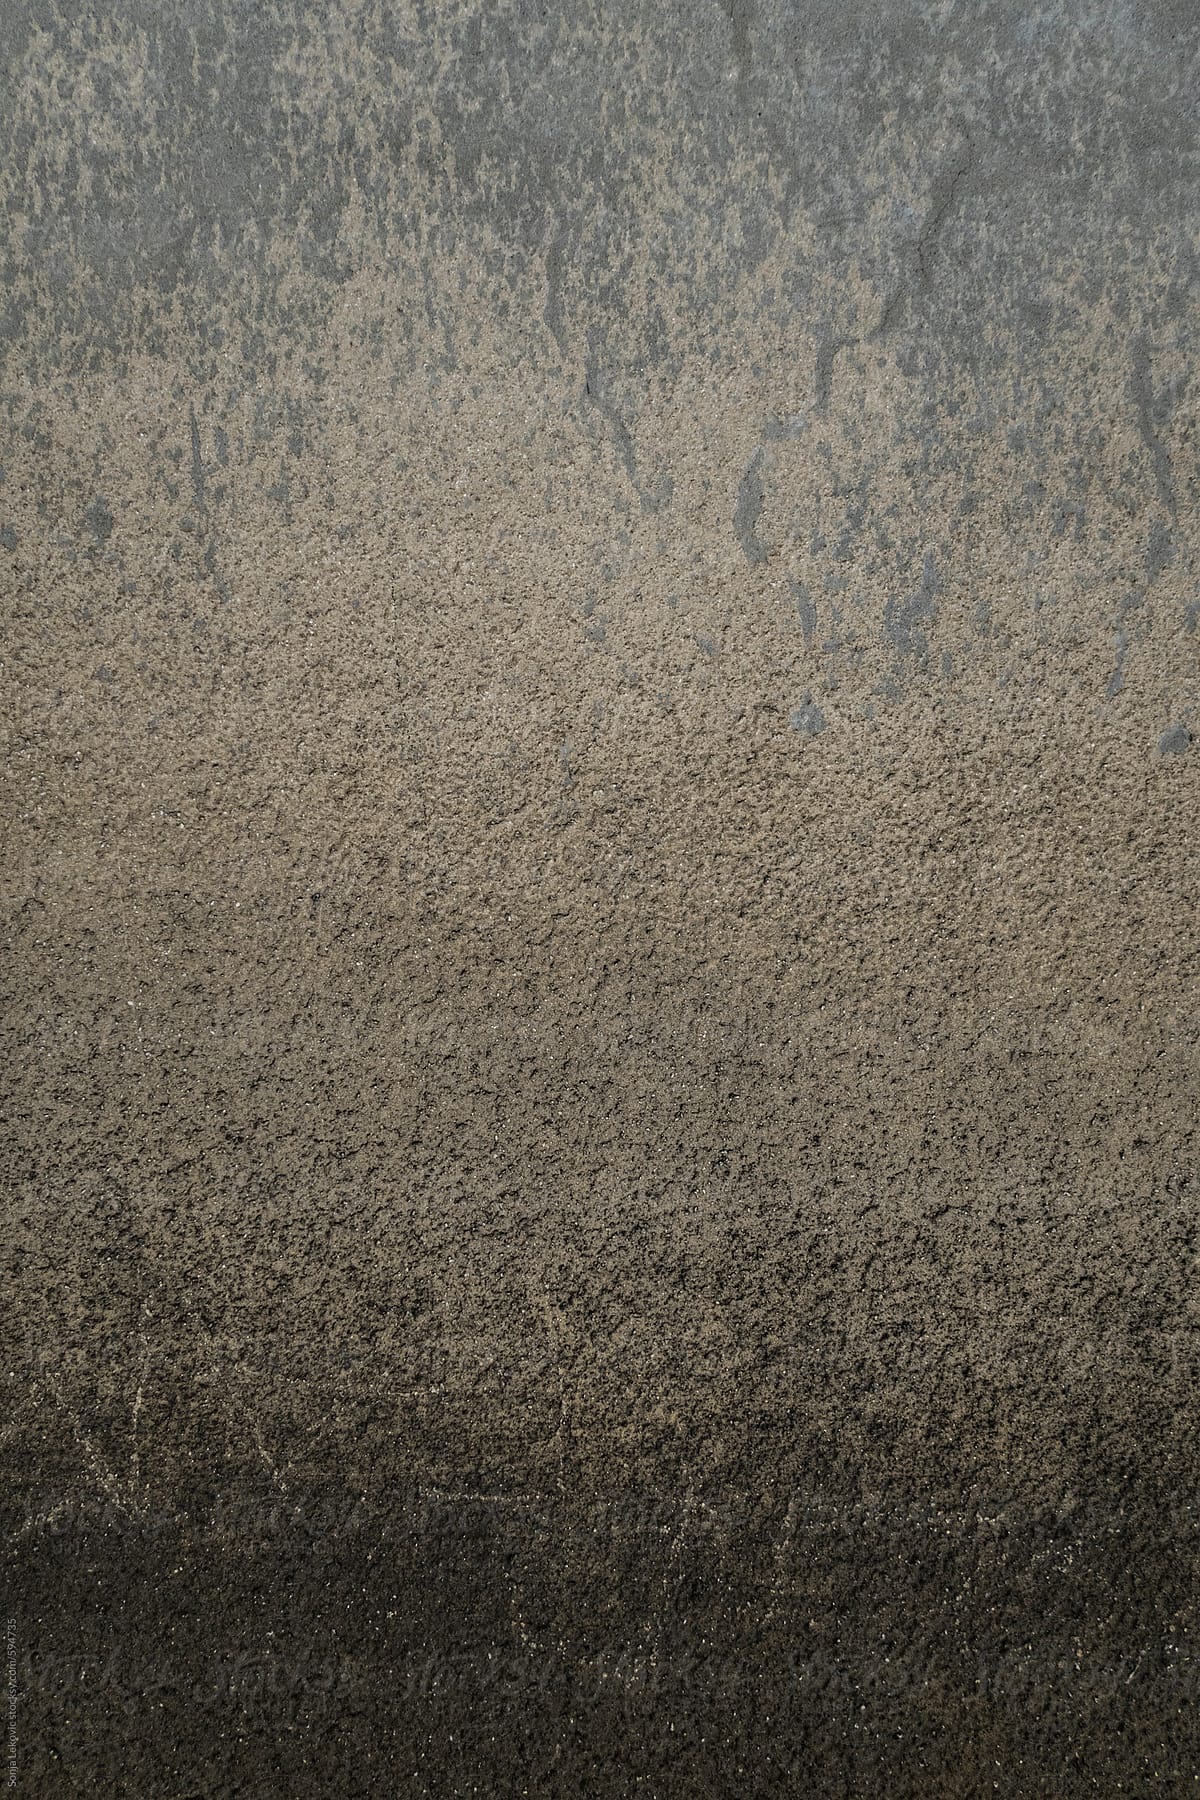 brown and grey textured wall background